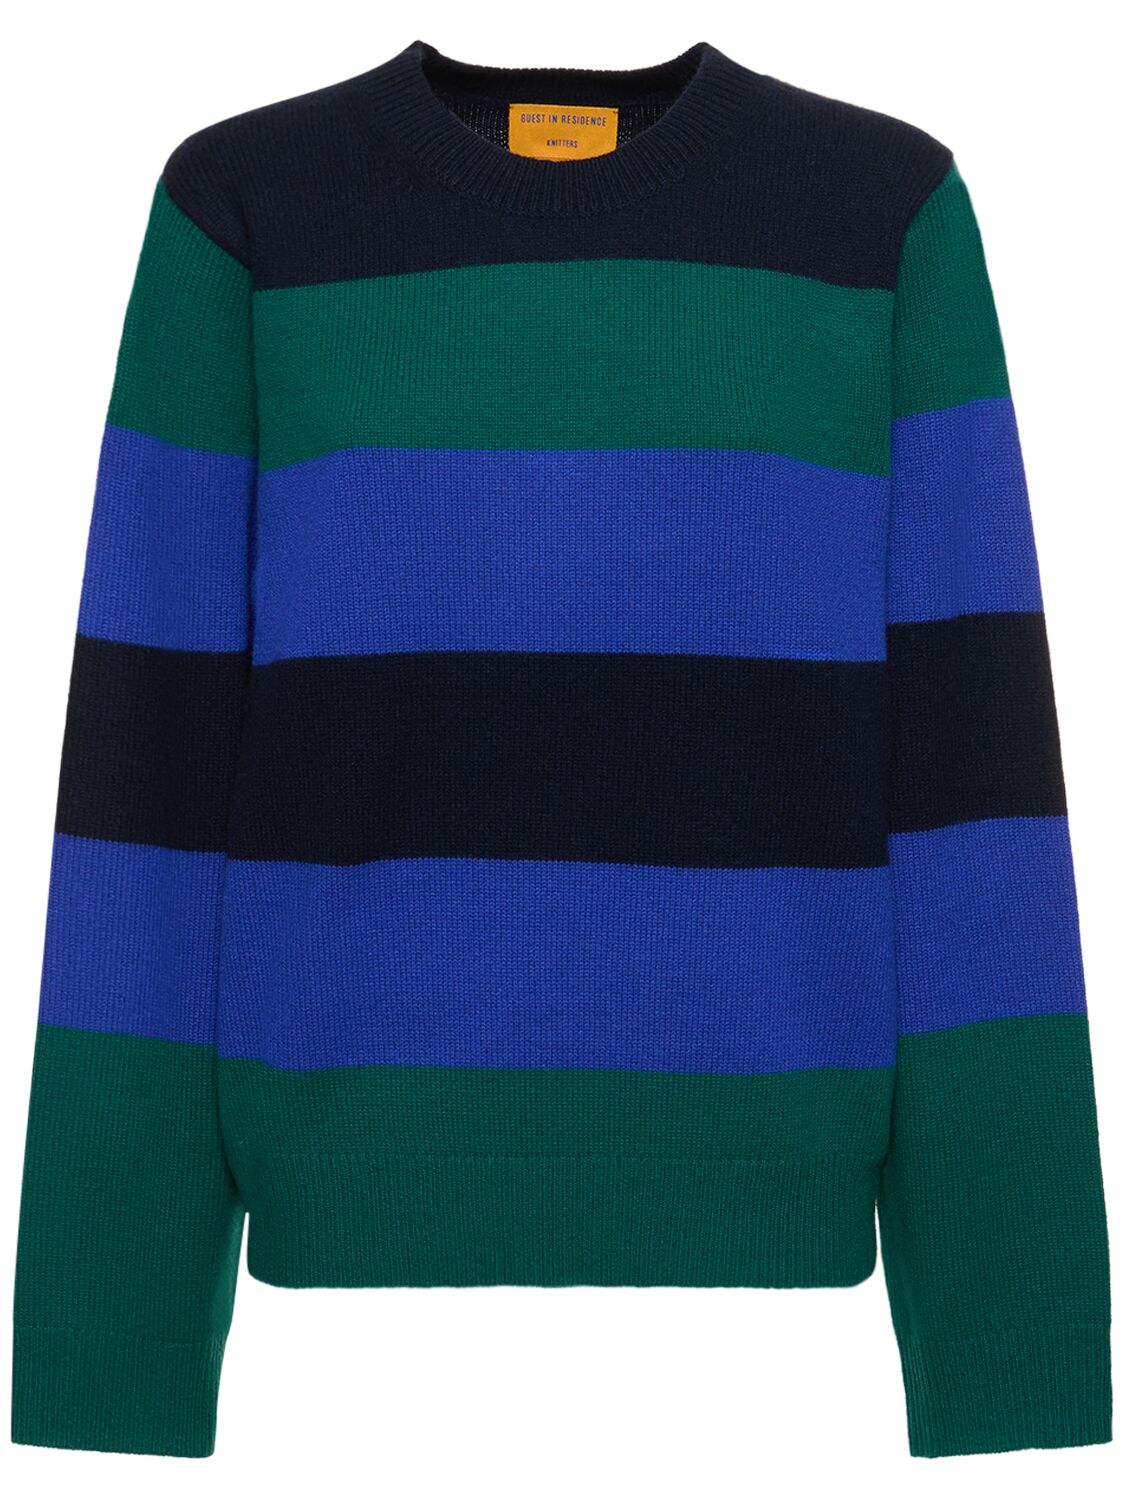 Guest In Residence Striped Cashmere Crewneck Sweater In Green,blue